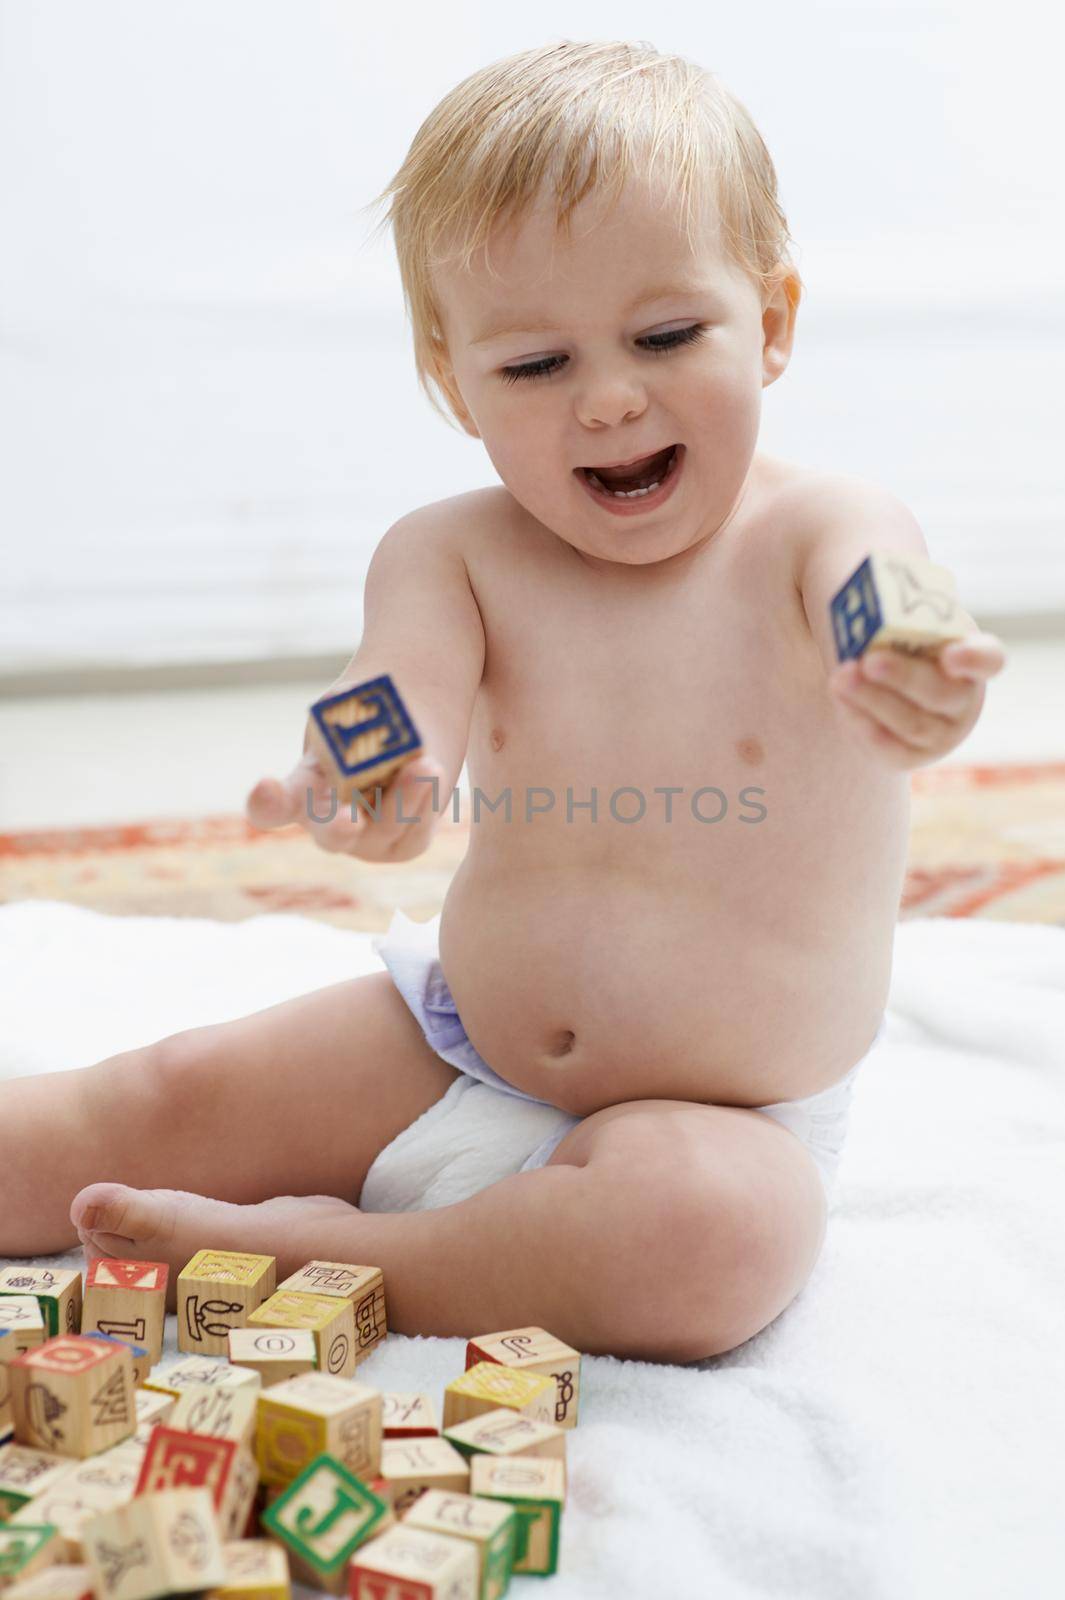 Showing interest in educational games. A baby playing with his building blocks looking content. by YuriArcurs